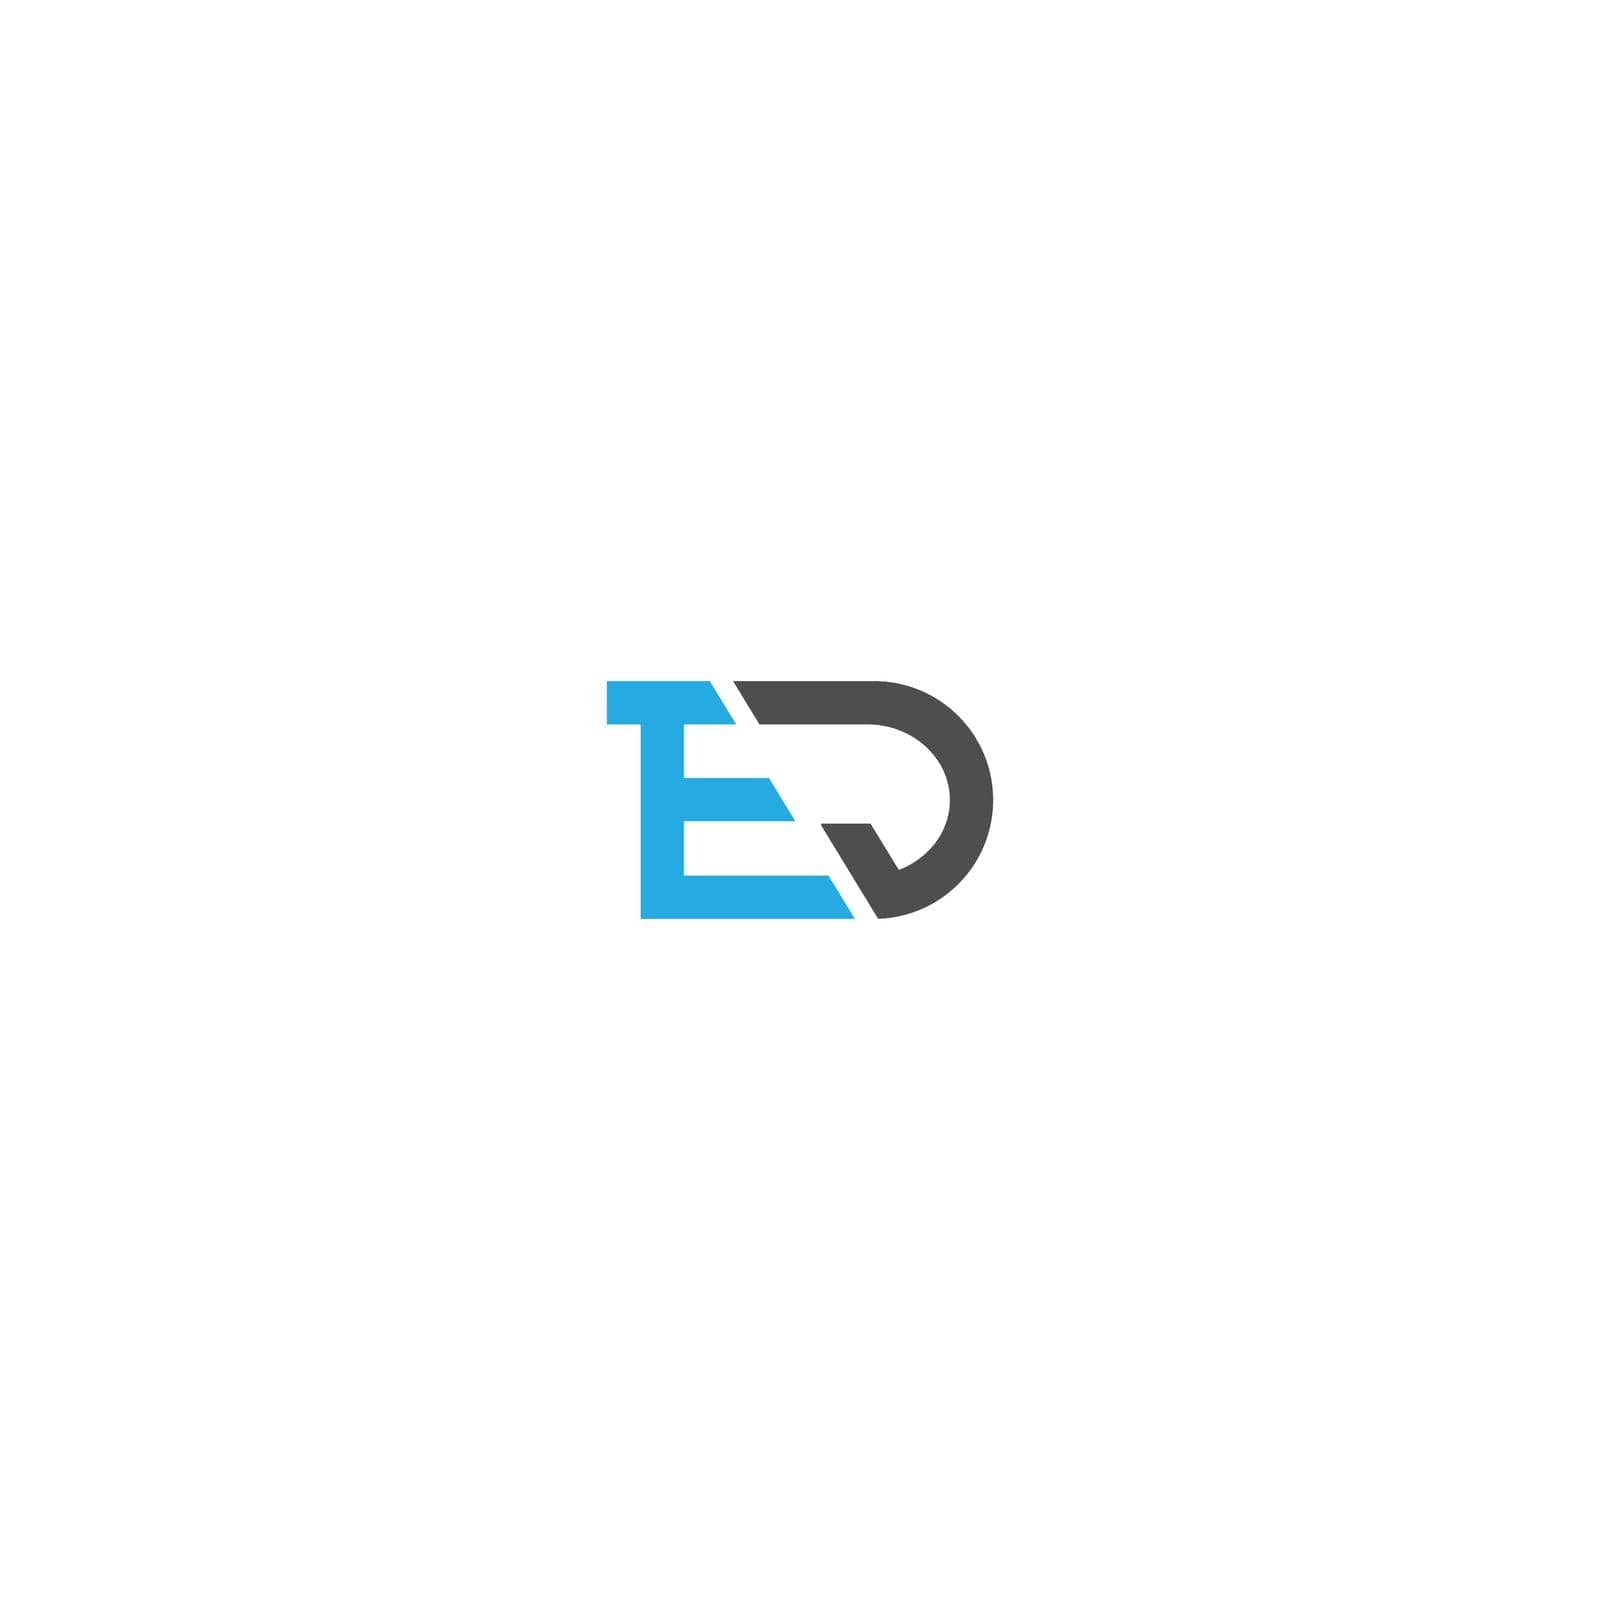 letter ed icon vector by bellaxbudhong3